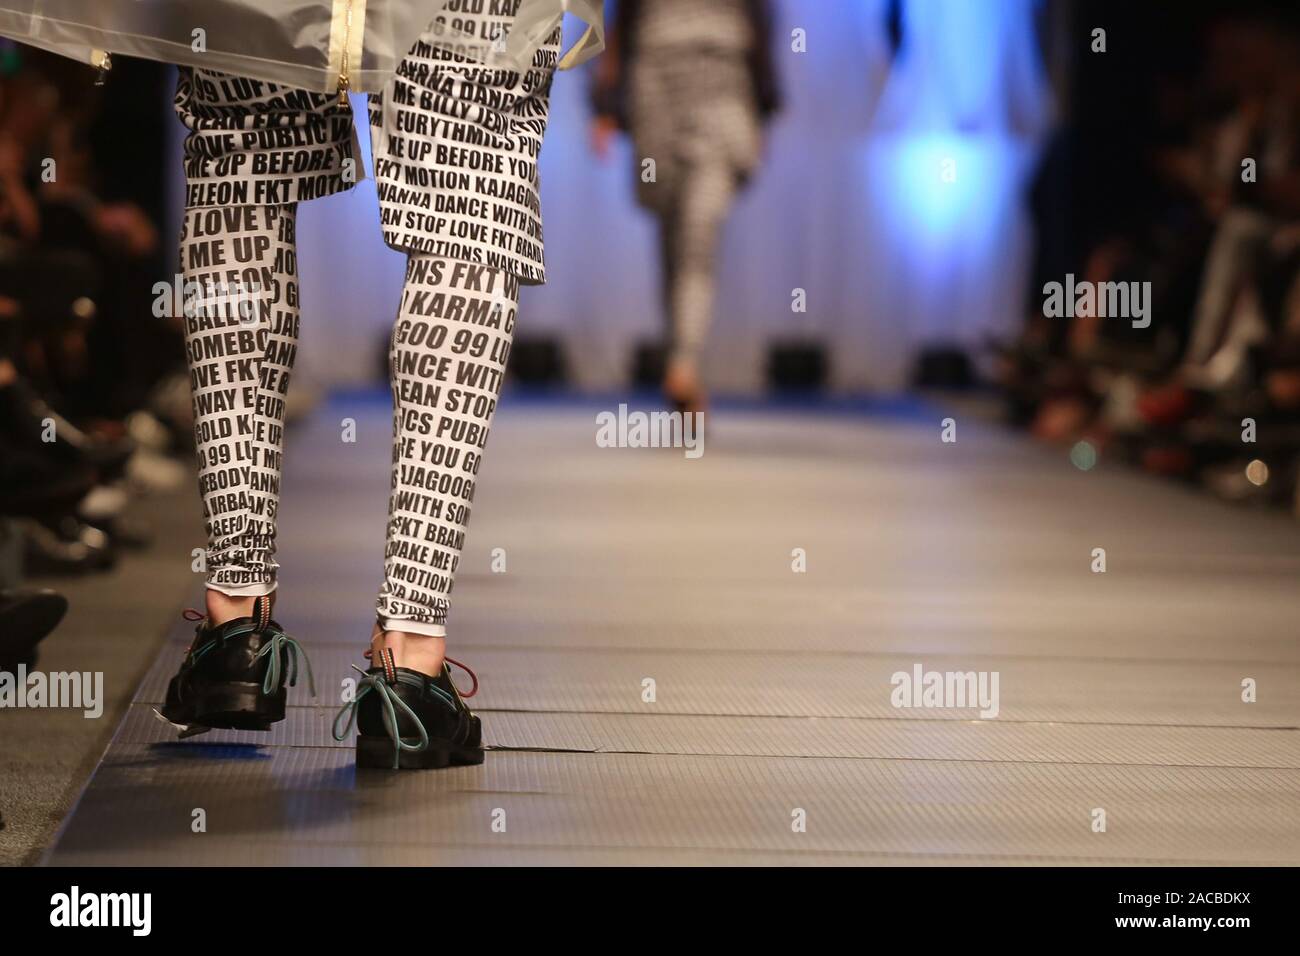 Model walk the runway at Fashion Show. Legs of model on catwalk runway show  event Stock Photo - Alamy